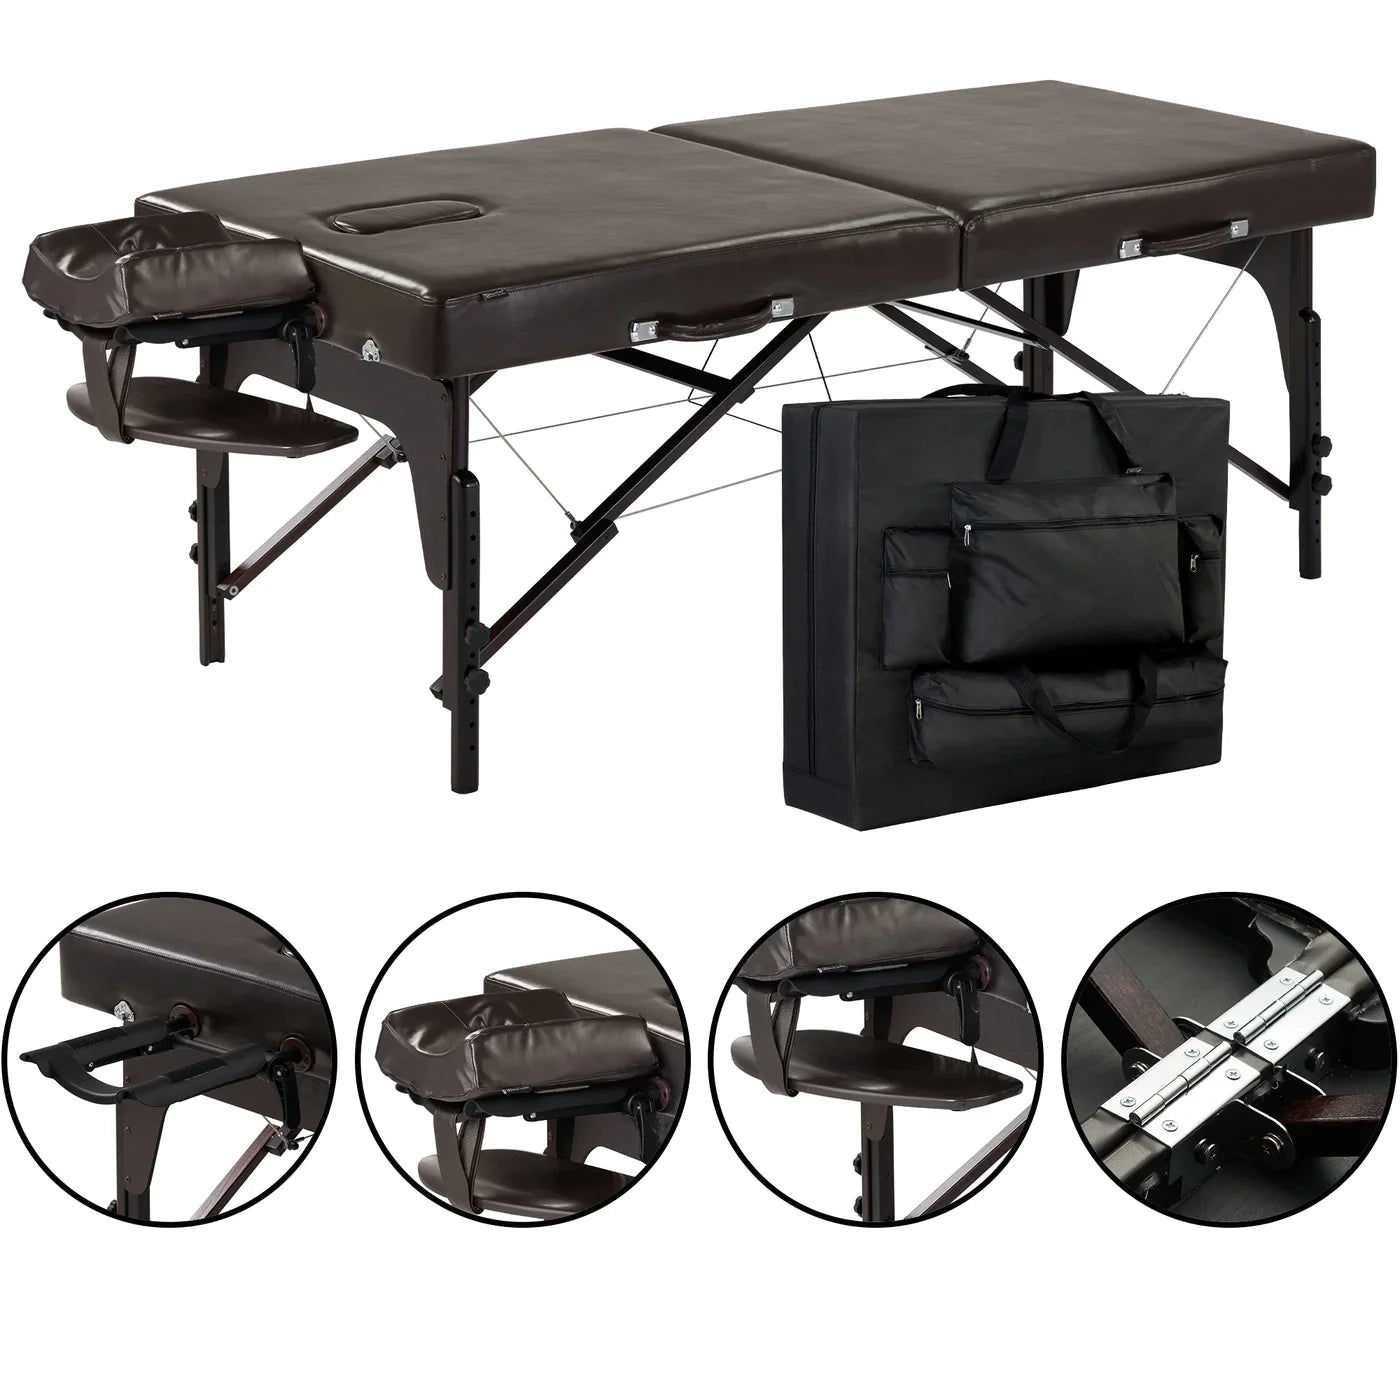 Spabodega 31” SUPREME™ LX Portable Massage Table Package with Ambient Light System